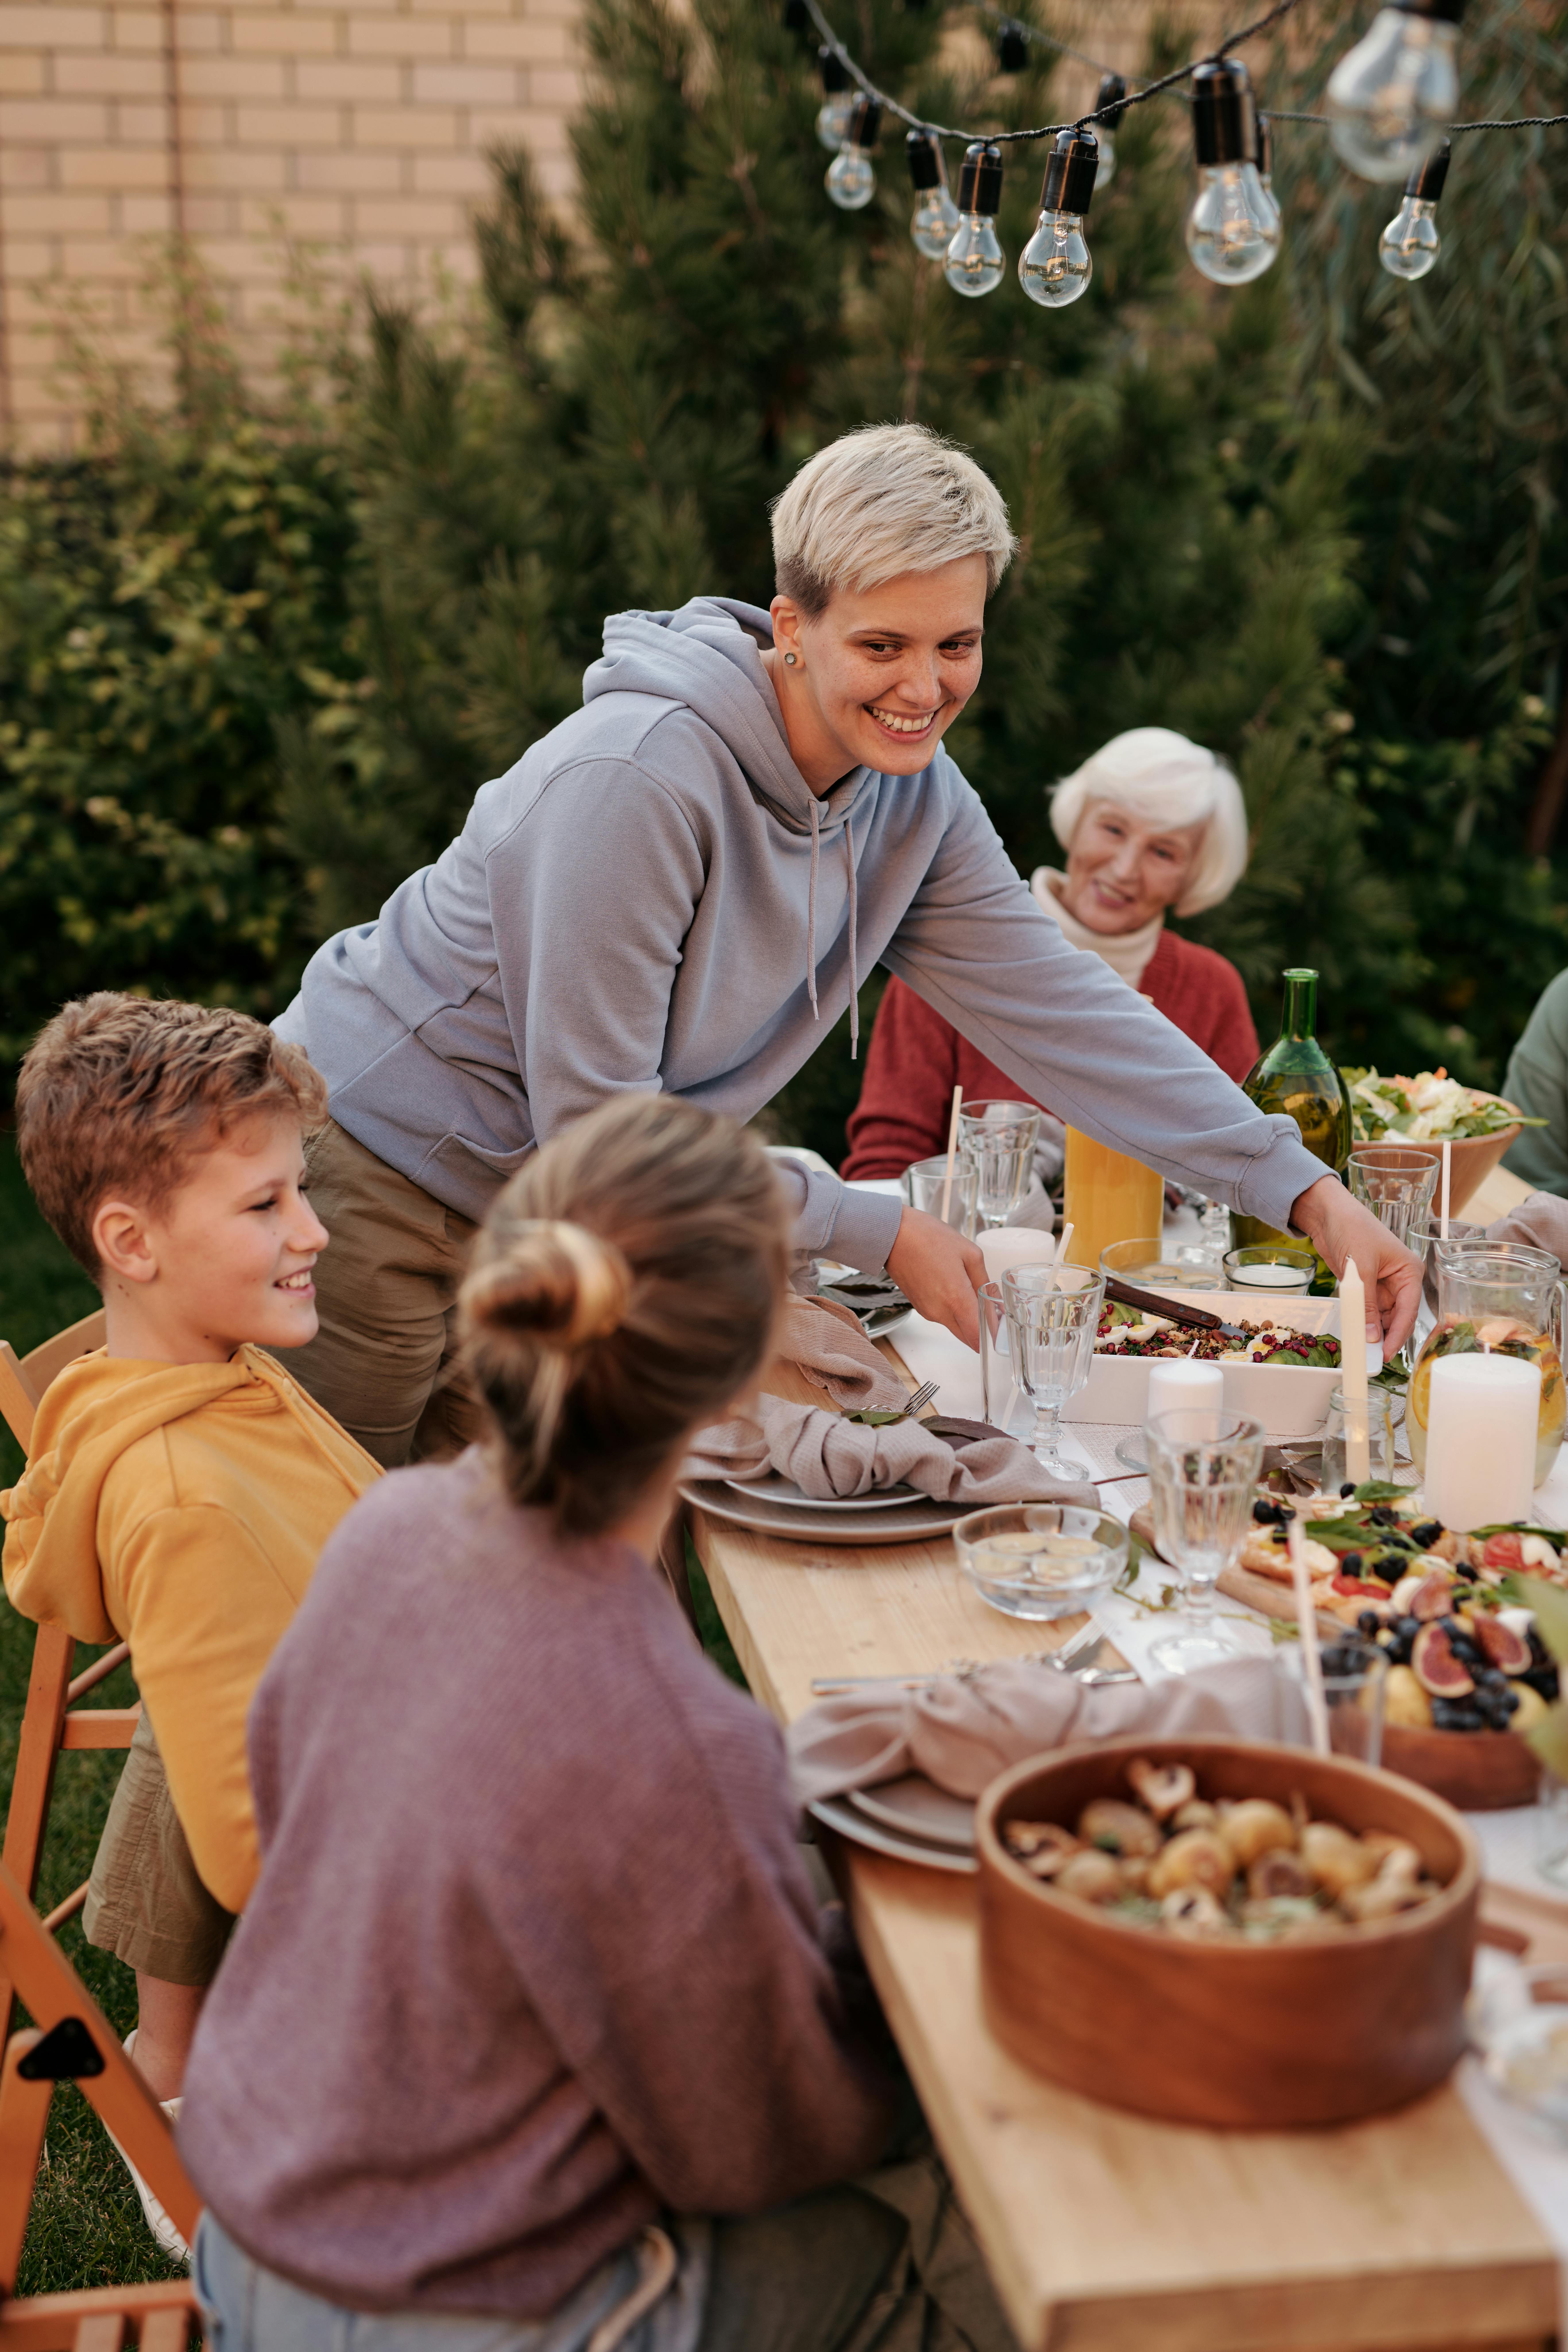 Woman at an outdoor family dinner | Source: Pexels